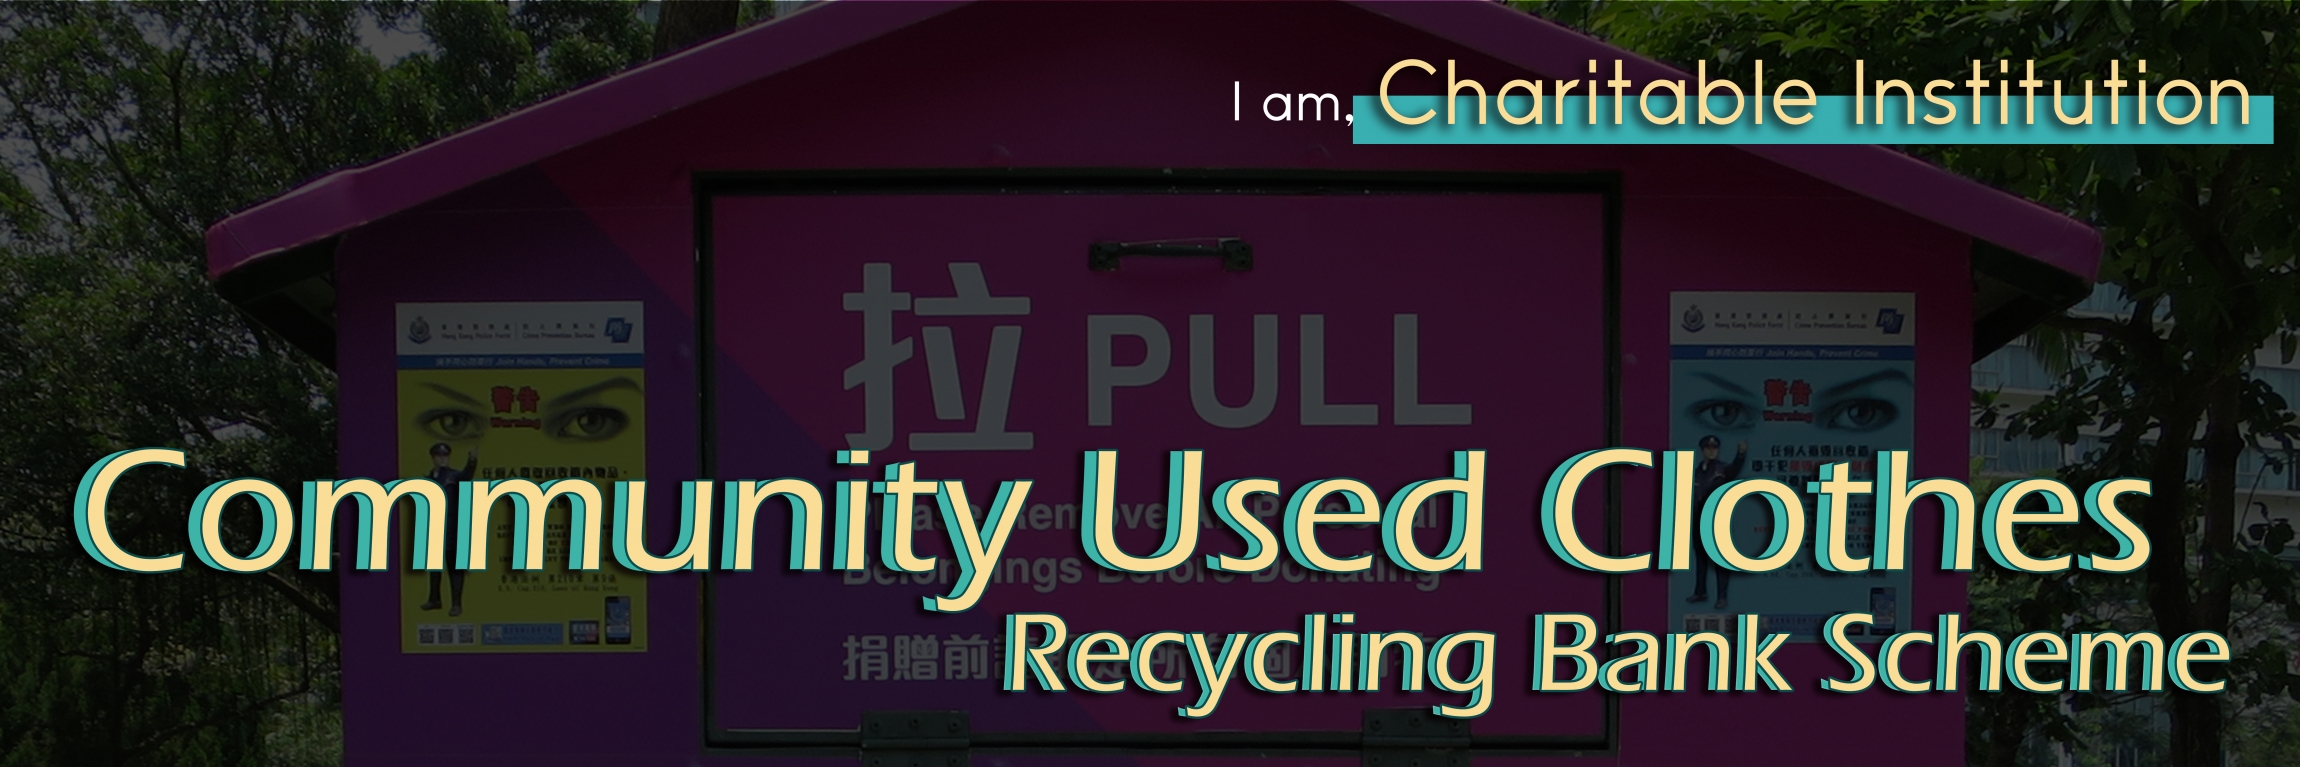 Community Used Clothes Recycling Bank Scheme